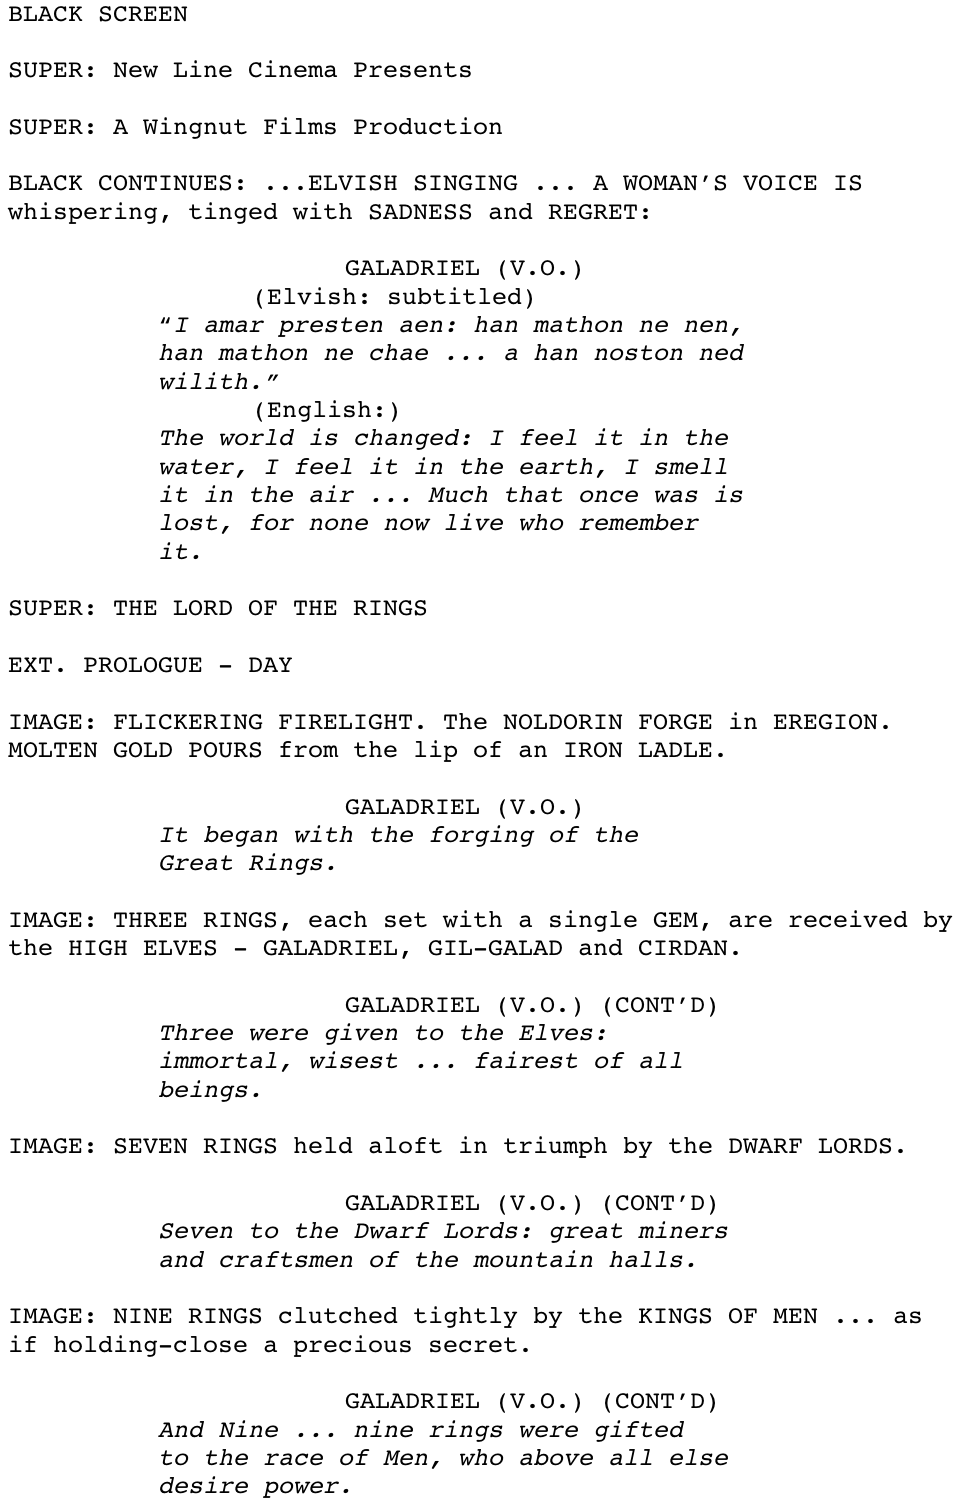 Screenplay Edit: “The Lord of the Rings: The Fellowship of the